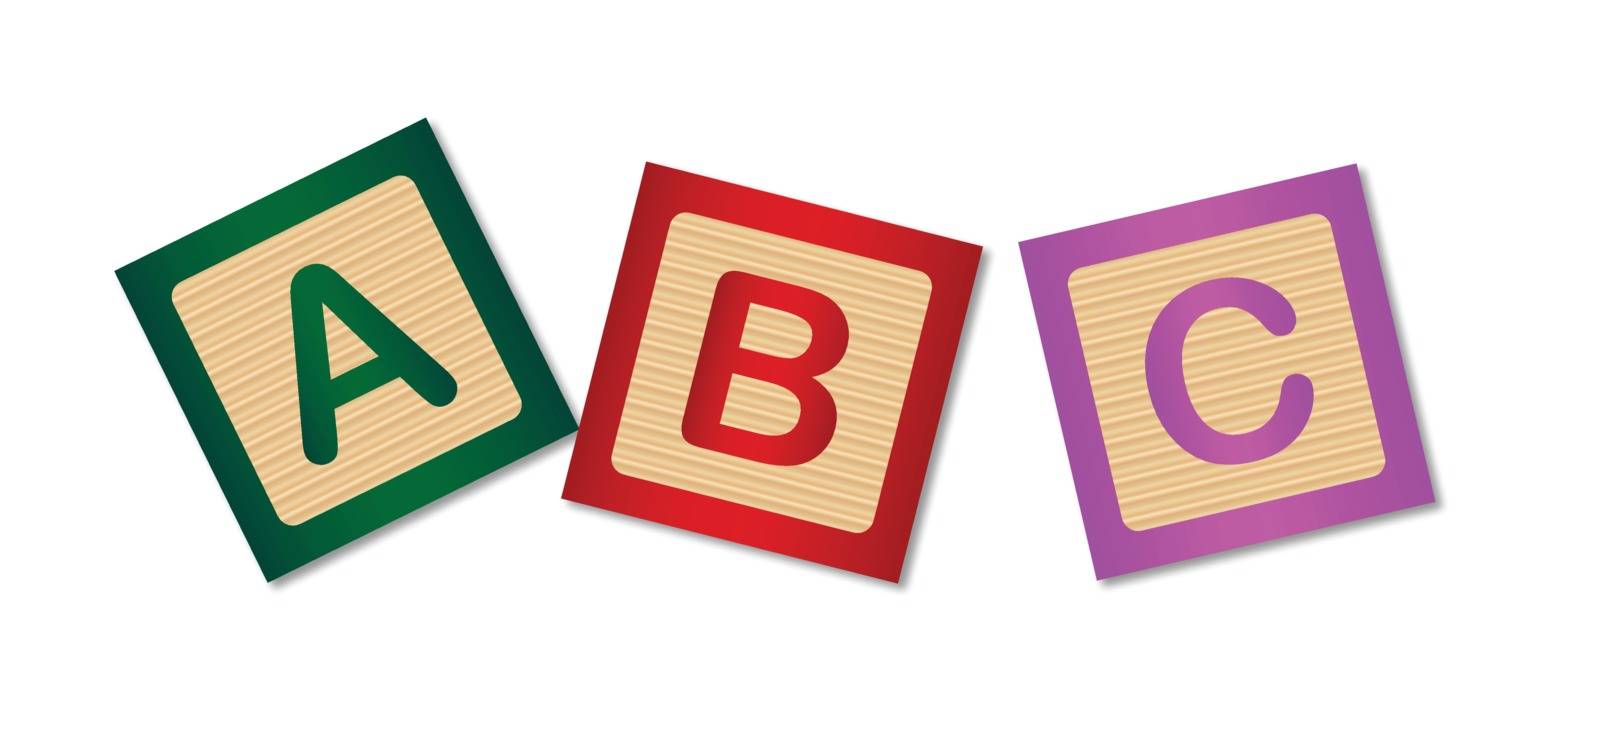 Wooden blocks with the letters ABC over a white background